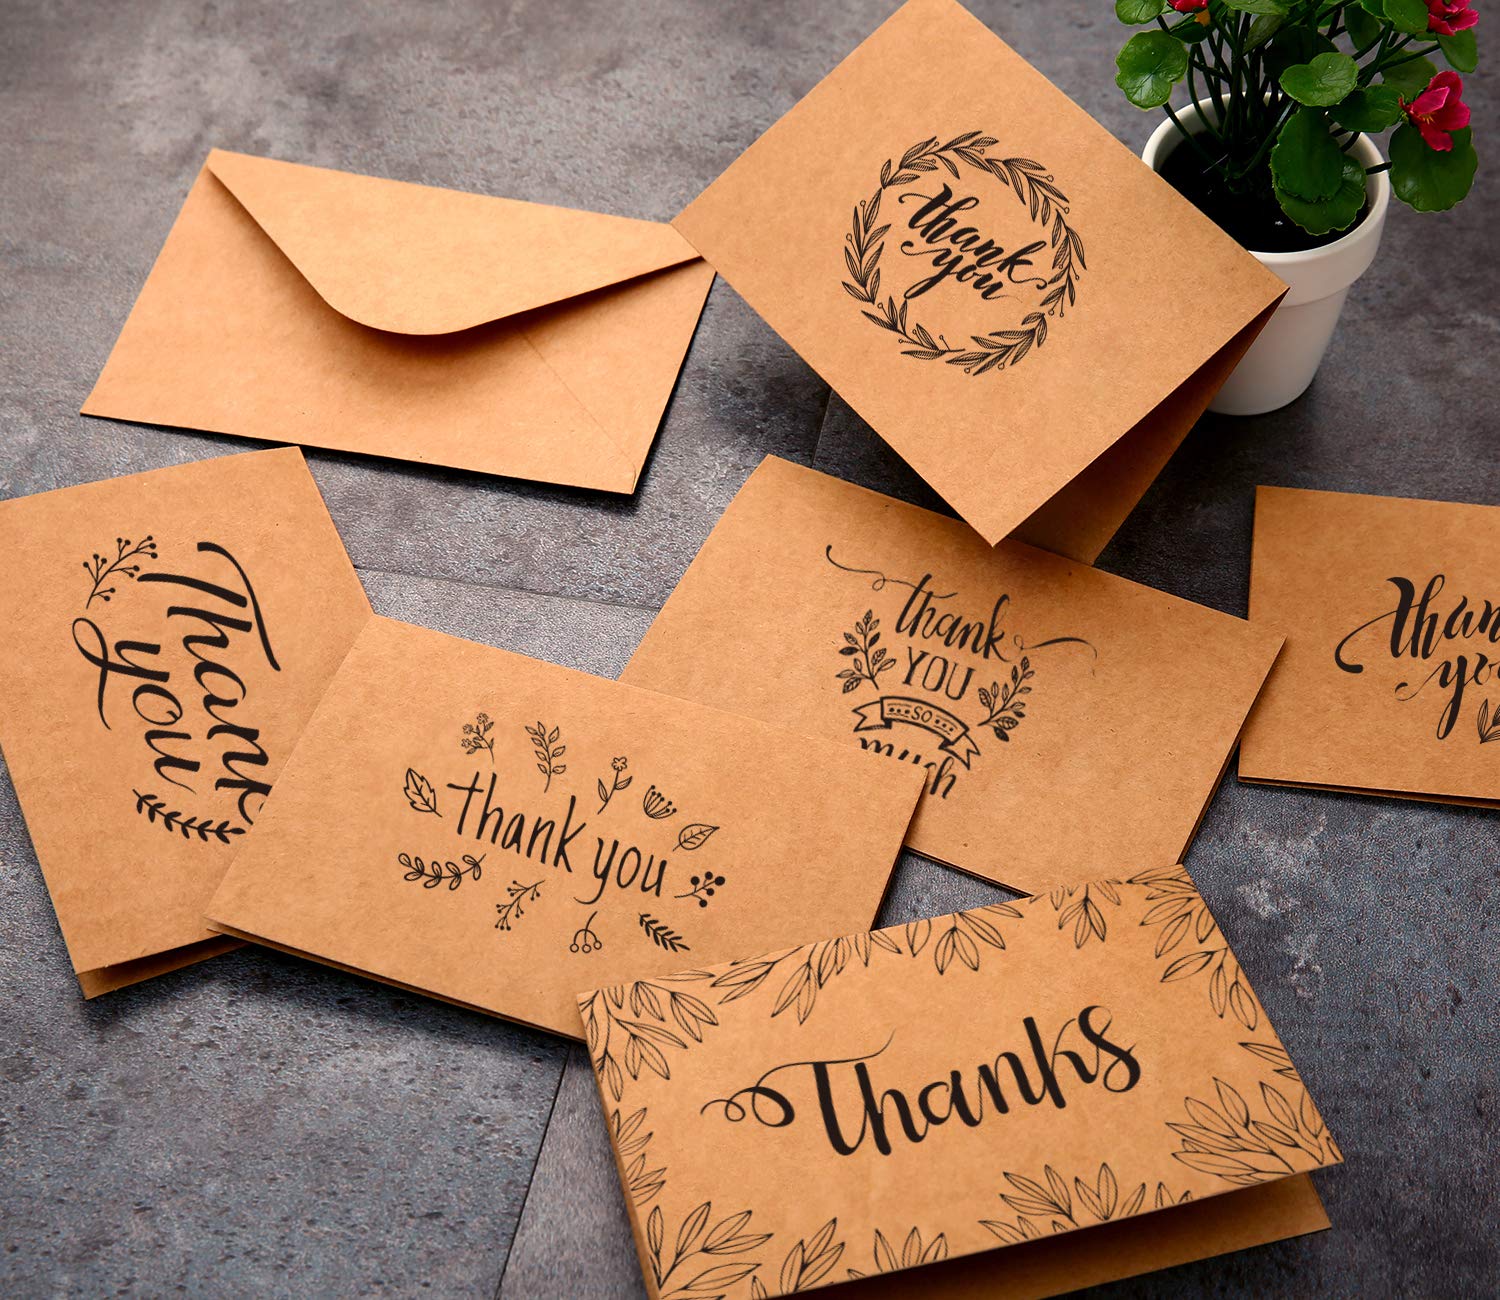 Thank You Cards of Ohuhu, 36 Pack Brown Kraft Paper 6 Design of Assorted Thank U Greeting Note Card with Envelopes and Stickers for Wedding, Business, Birthday, Baby Shower, Blank Inside, 4 x 6 Inch